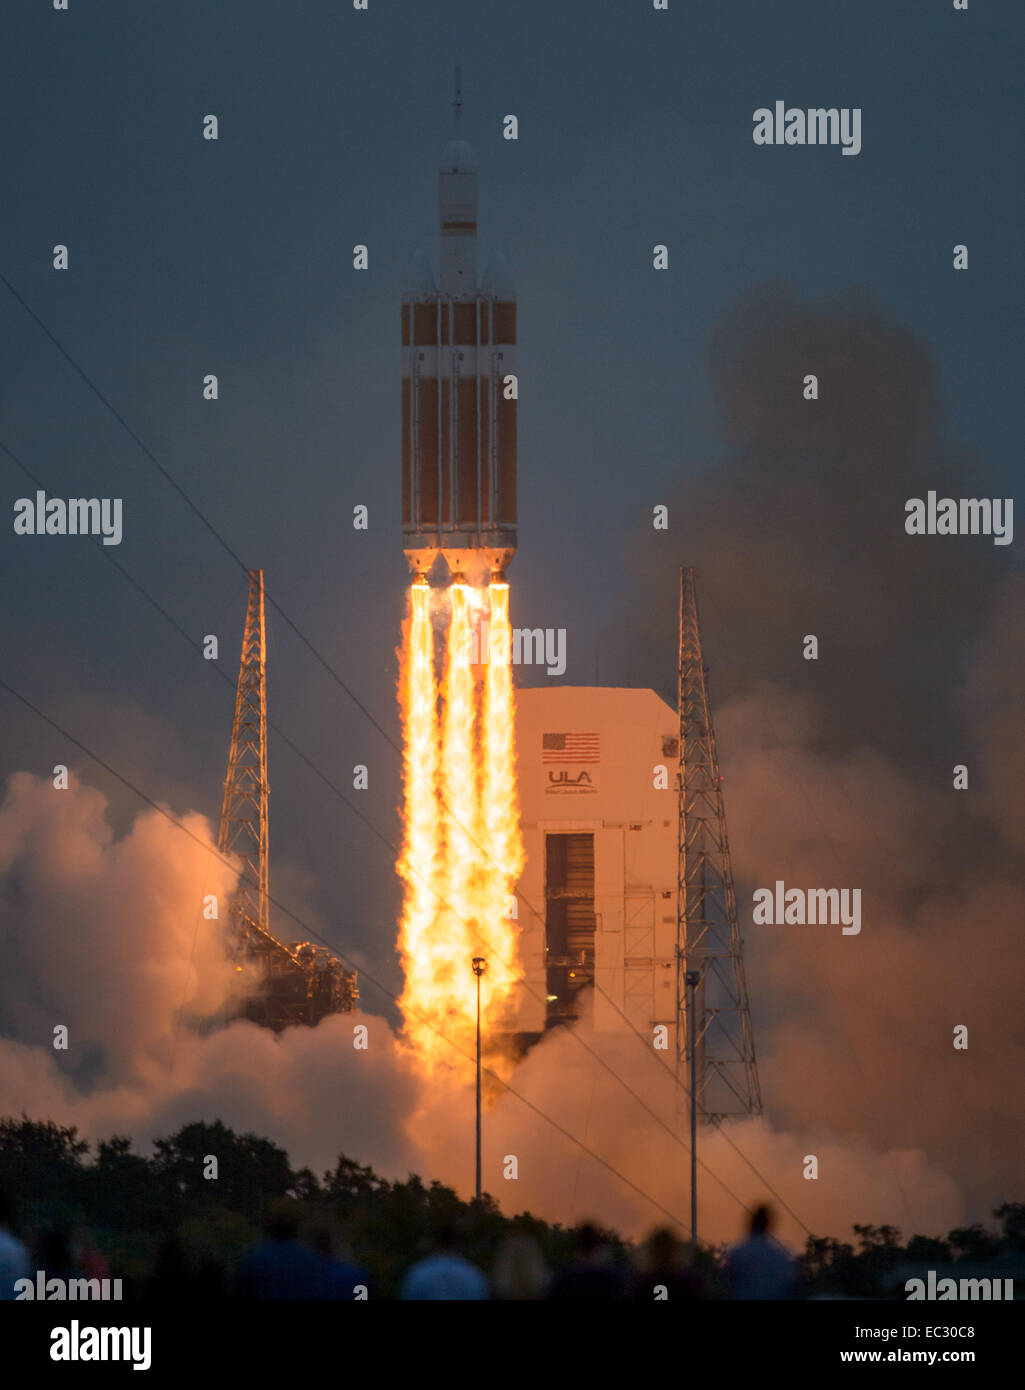 The United Launch Alliance Delta IV Heavy rocket with NASA’s Orion spacecraft mounted atop, lifts off from Cape Canaveral Air Force Station's Space Launch Complex 37 at at 7:05 a.m. EST, Friday, Dec. 5, 2014, in Florida. The Orion spacecraft will orbit Earth twice, reaching an altitude of approximately 3,600 miles above Earth before landing in the Pacific Ocean. No one is aboard Orion for this flight test, but the spacecraft is designed to allow us to journey to destinations never before visited by humans, including an asteroid and Mars. Stock Photo